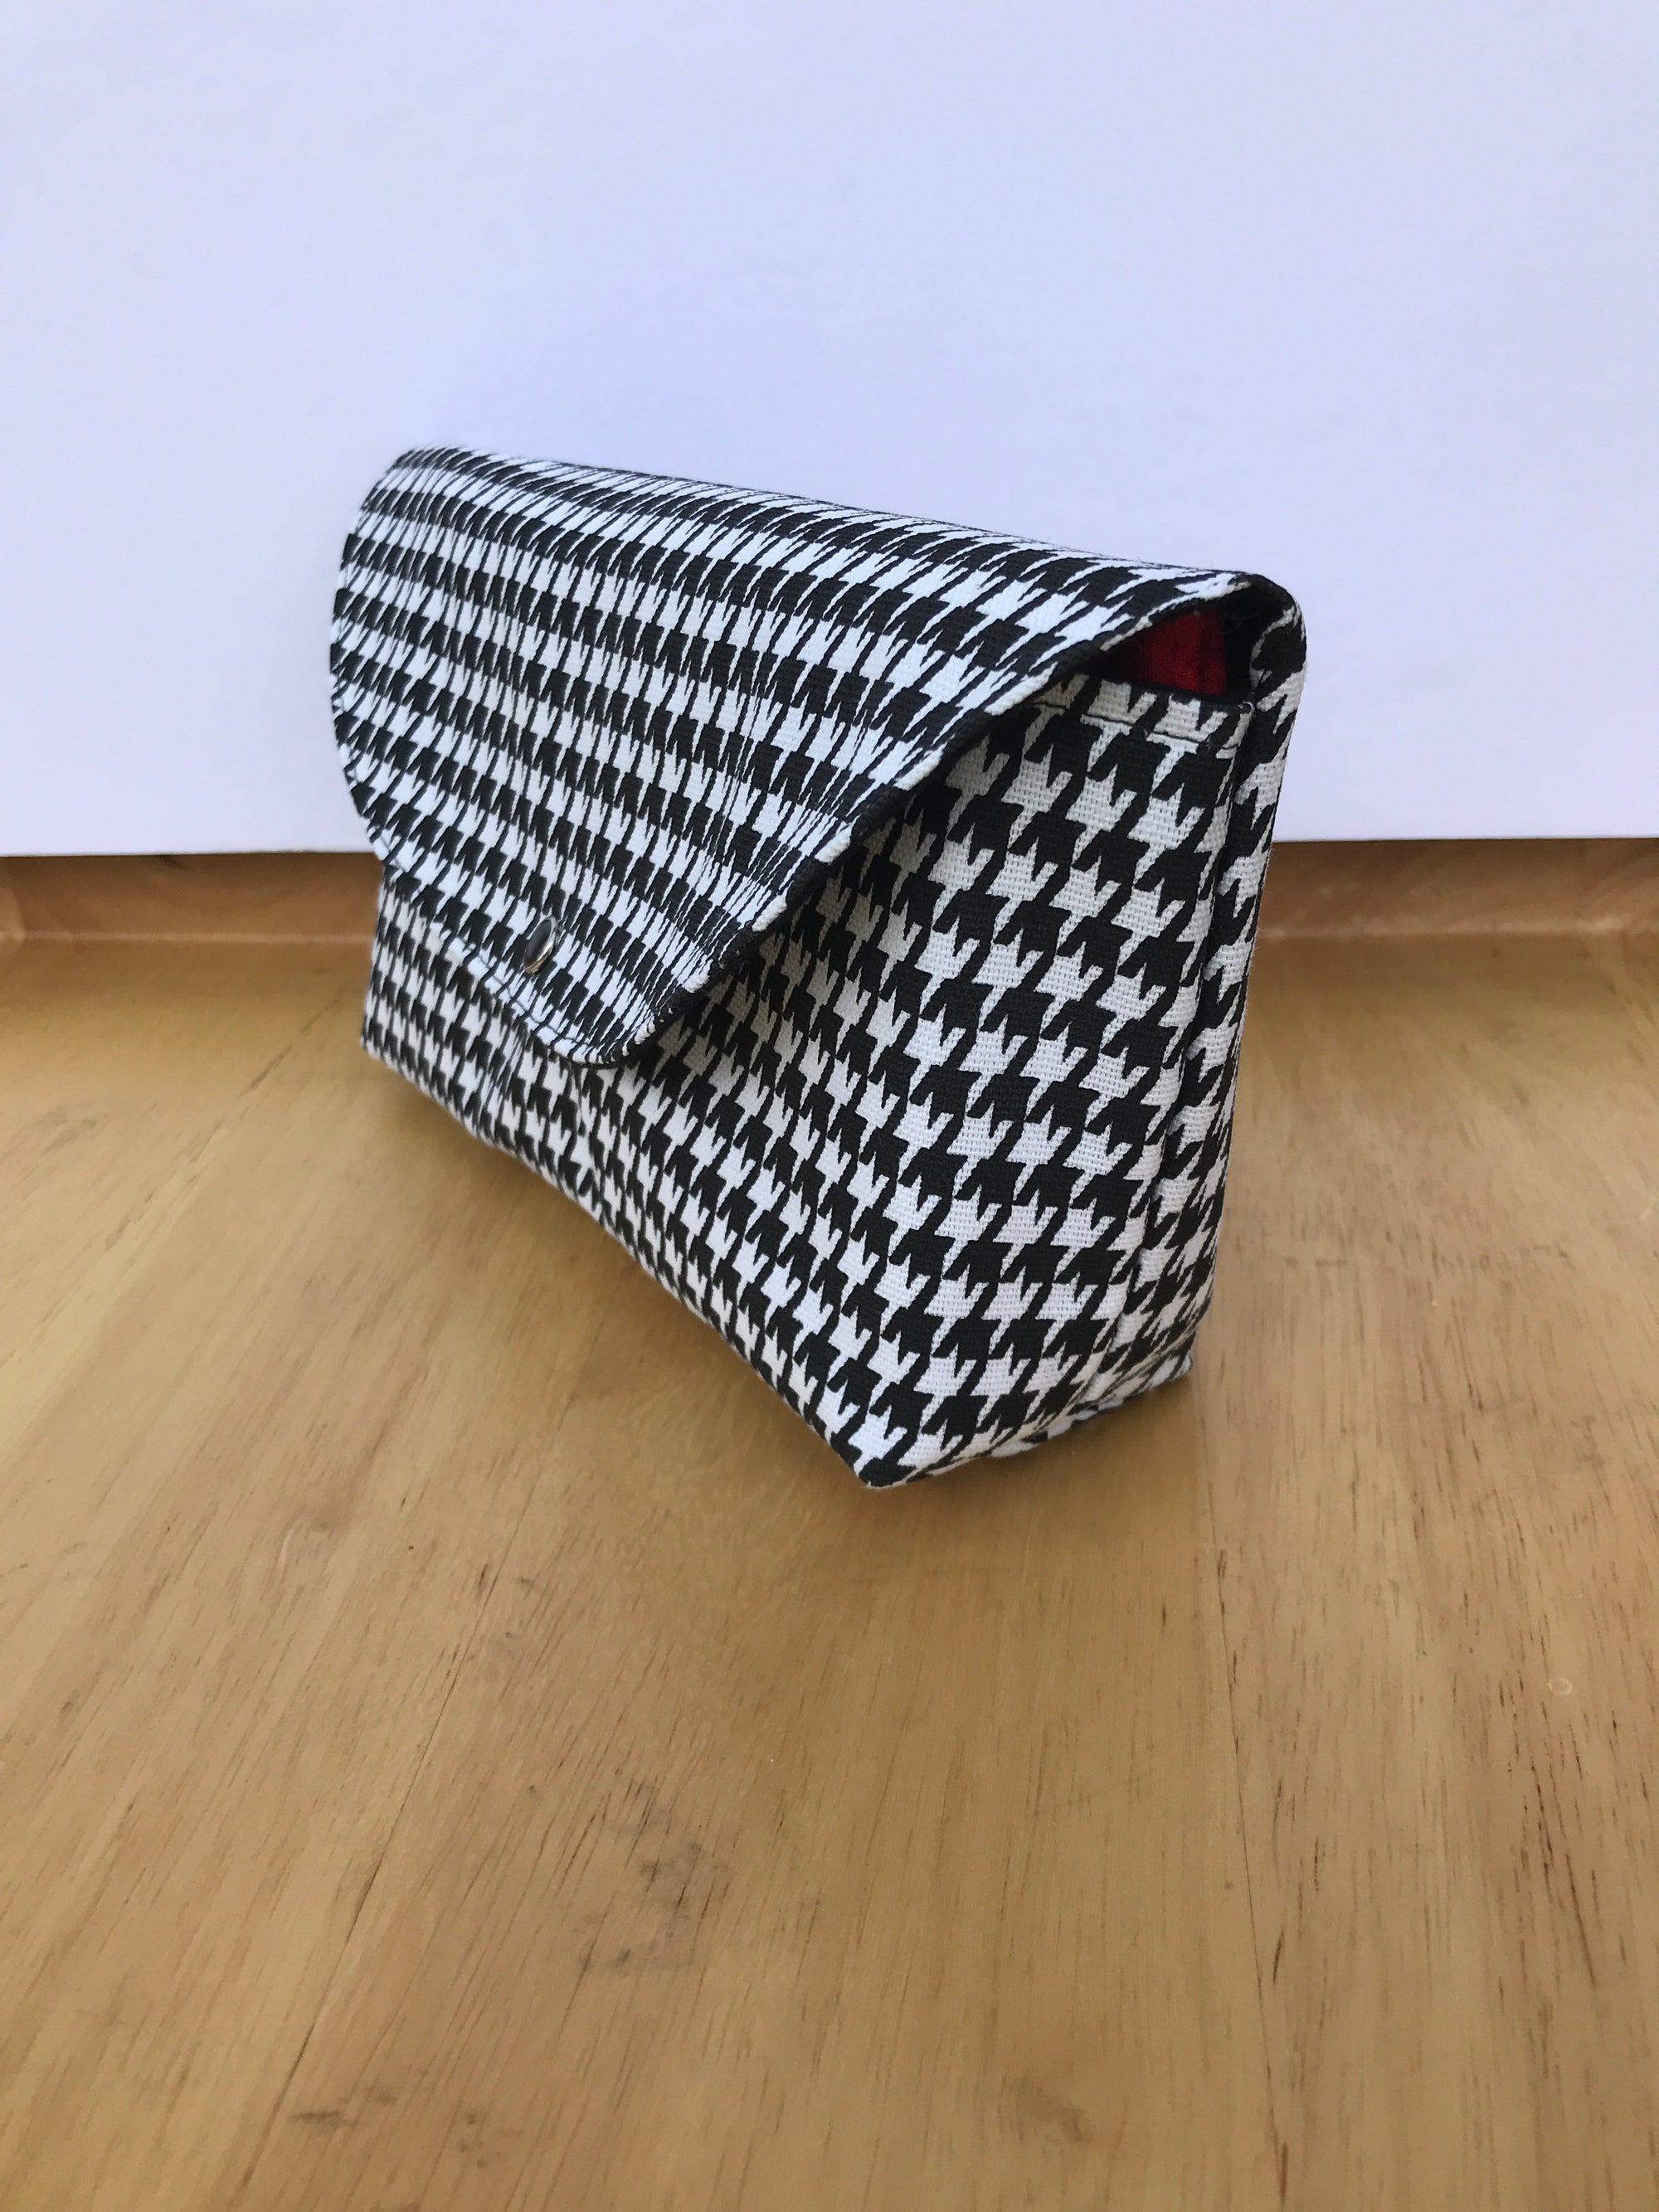 Budget Wallet Organizer System Houndstooth with Red